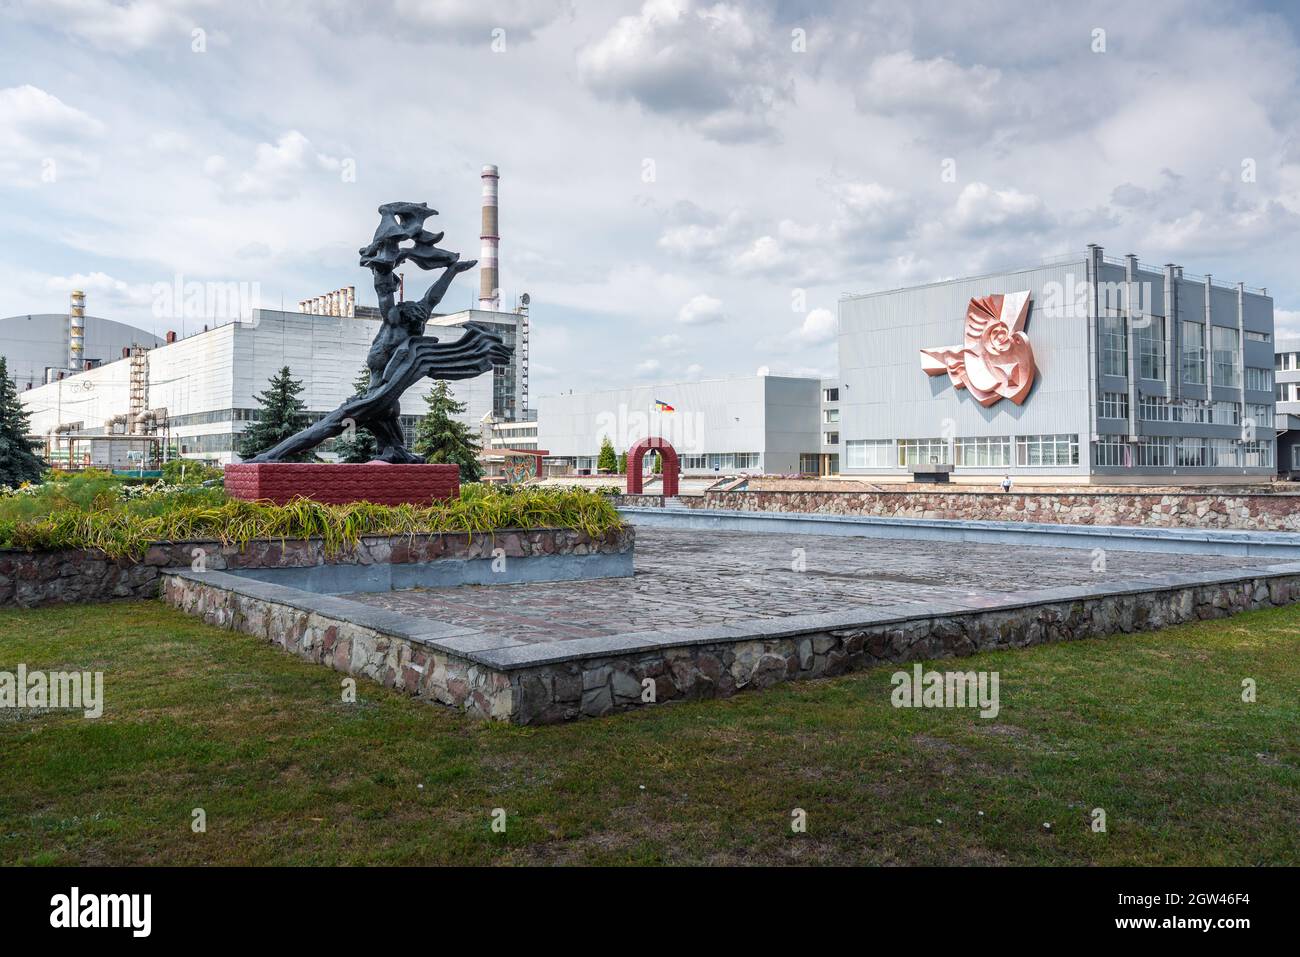 Administrative Buildings and Prometheus Sculpture at Chernobyl Nuclear Power Plant - Chernobyl Exclusion Zone, Ukraine Stock Photo